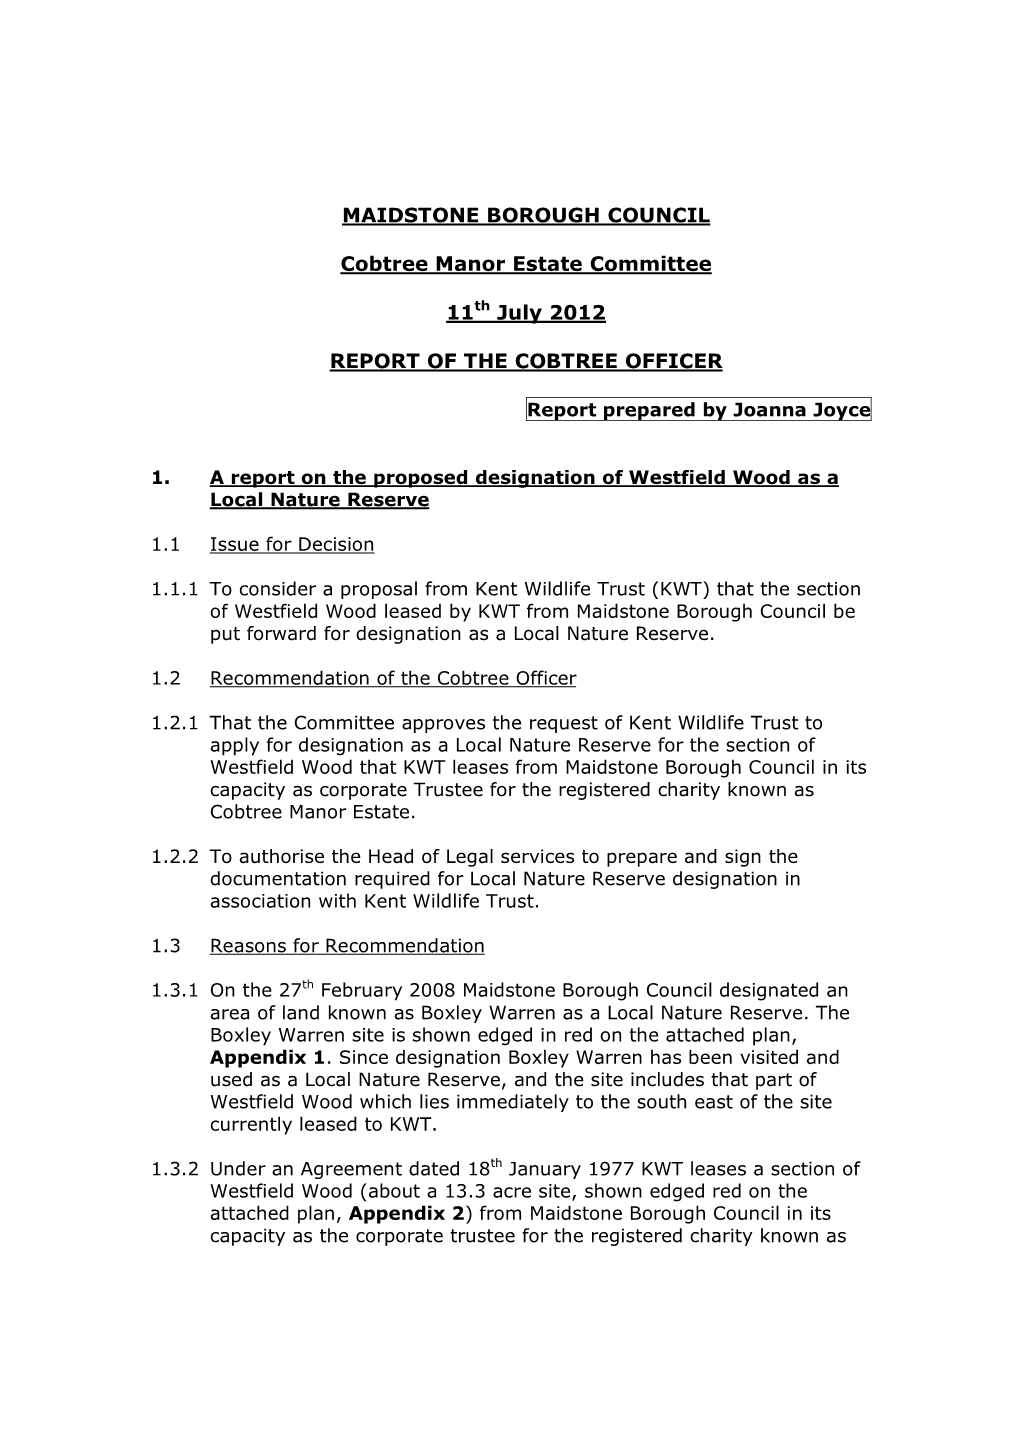 Cabinet, Council Or Committee Report for Westfield Wood Local